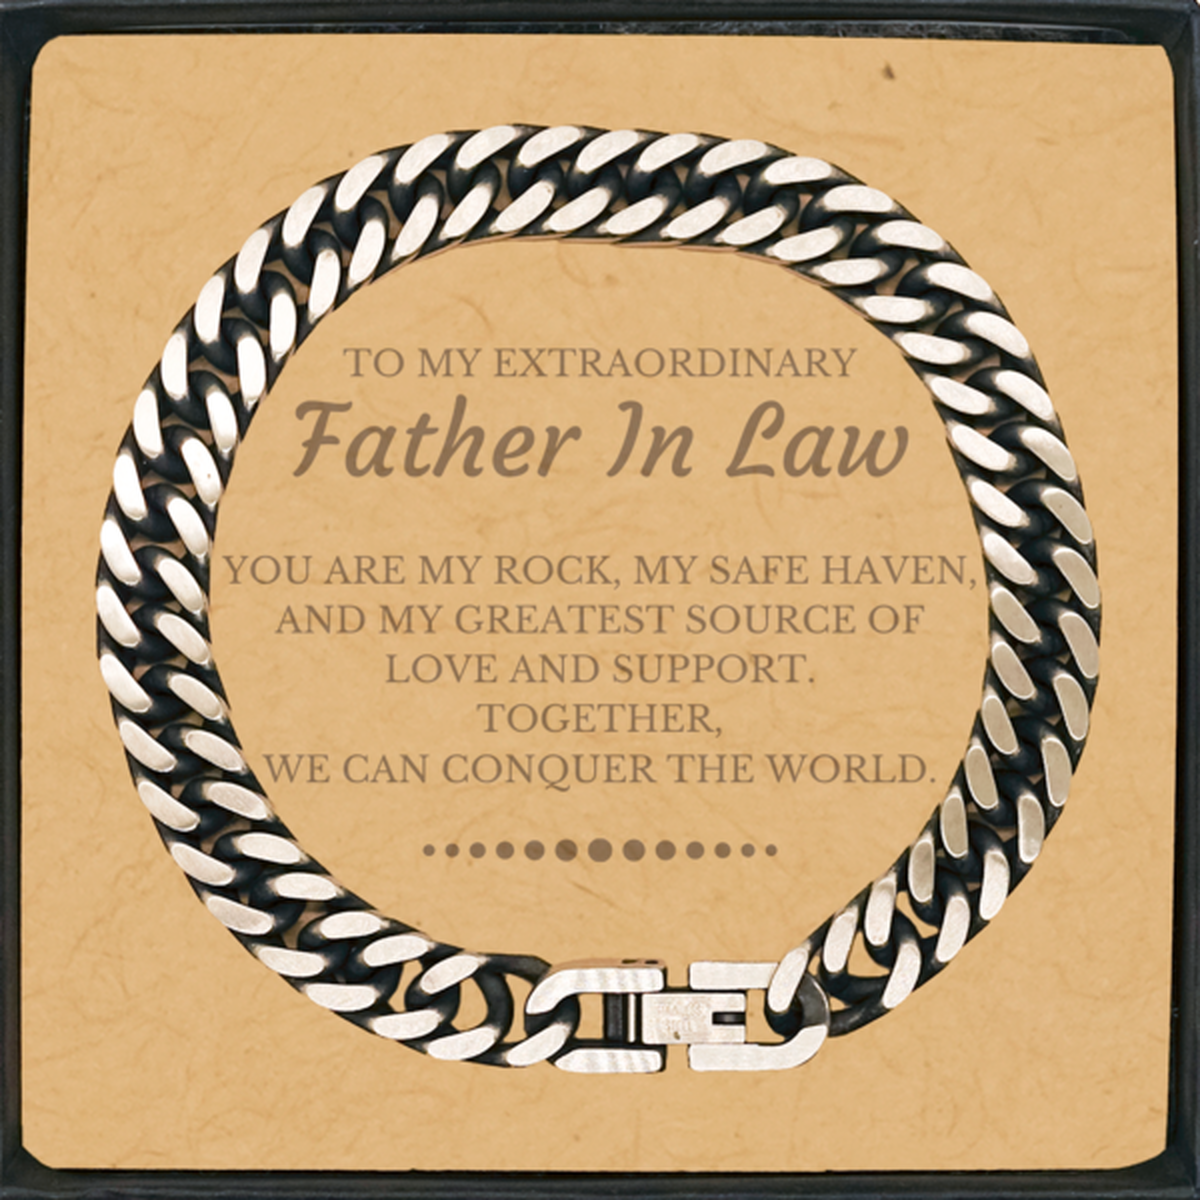 To My Extraordinary Father In Law Gifts, Together, we can conquer the world, Birthday Cuban Link Chain Bracelet For Father In Law, Christmas Gifts For Father In Law